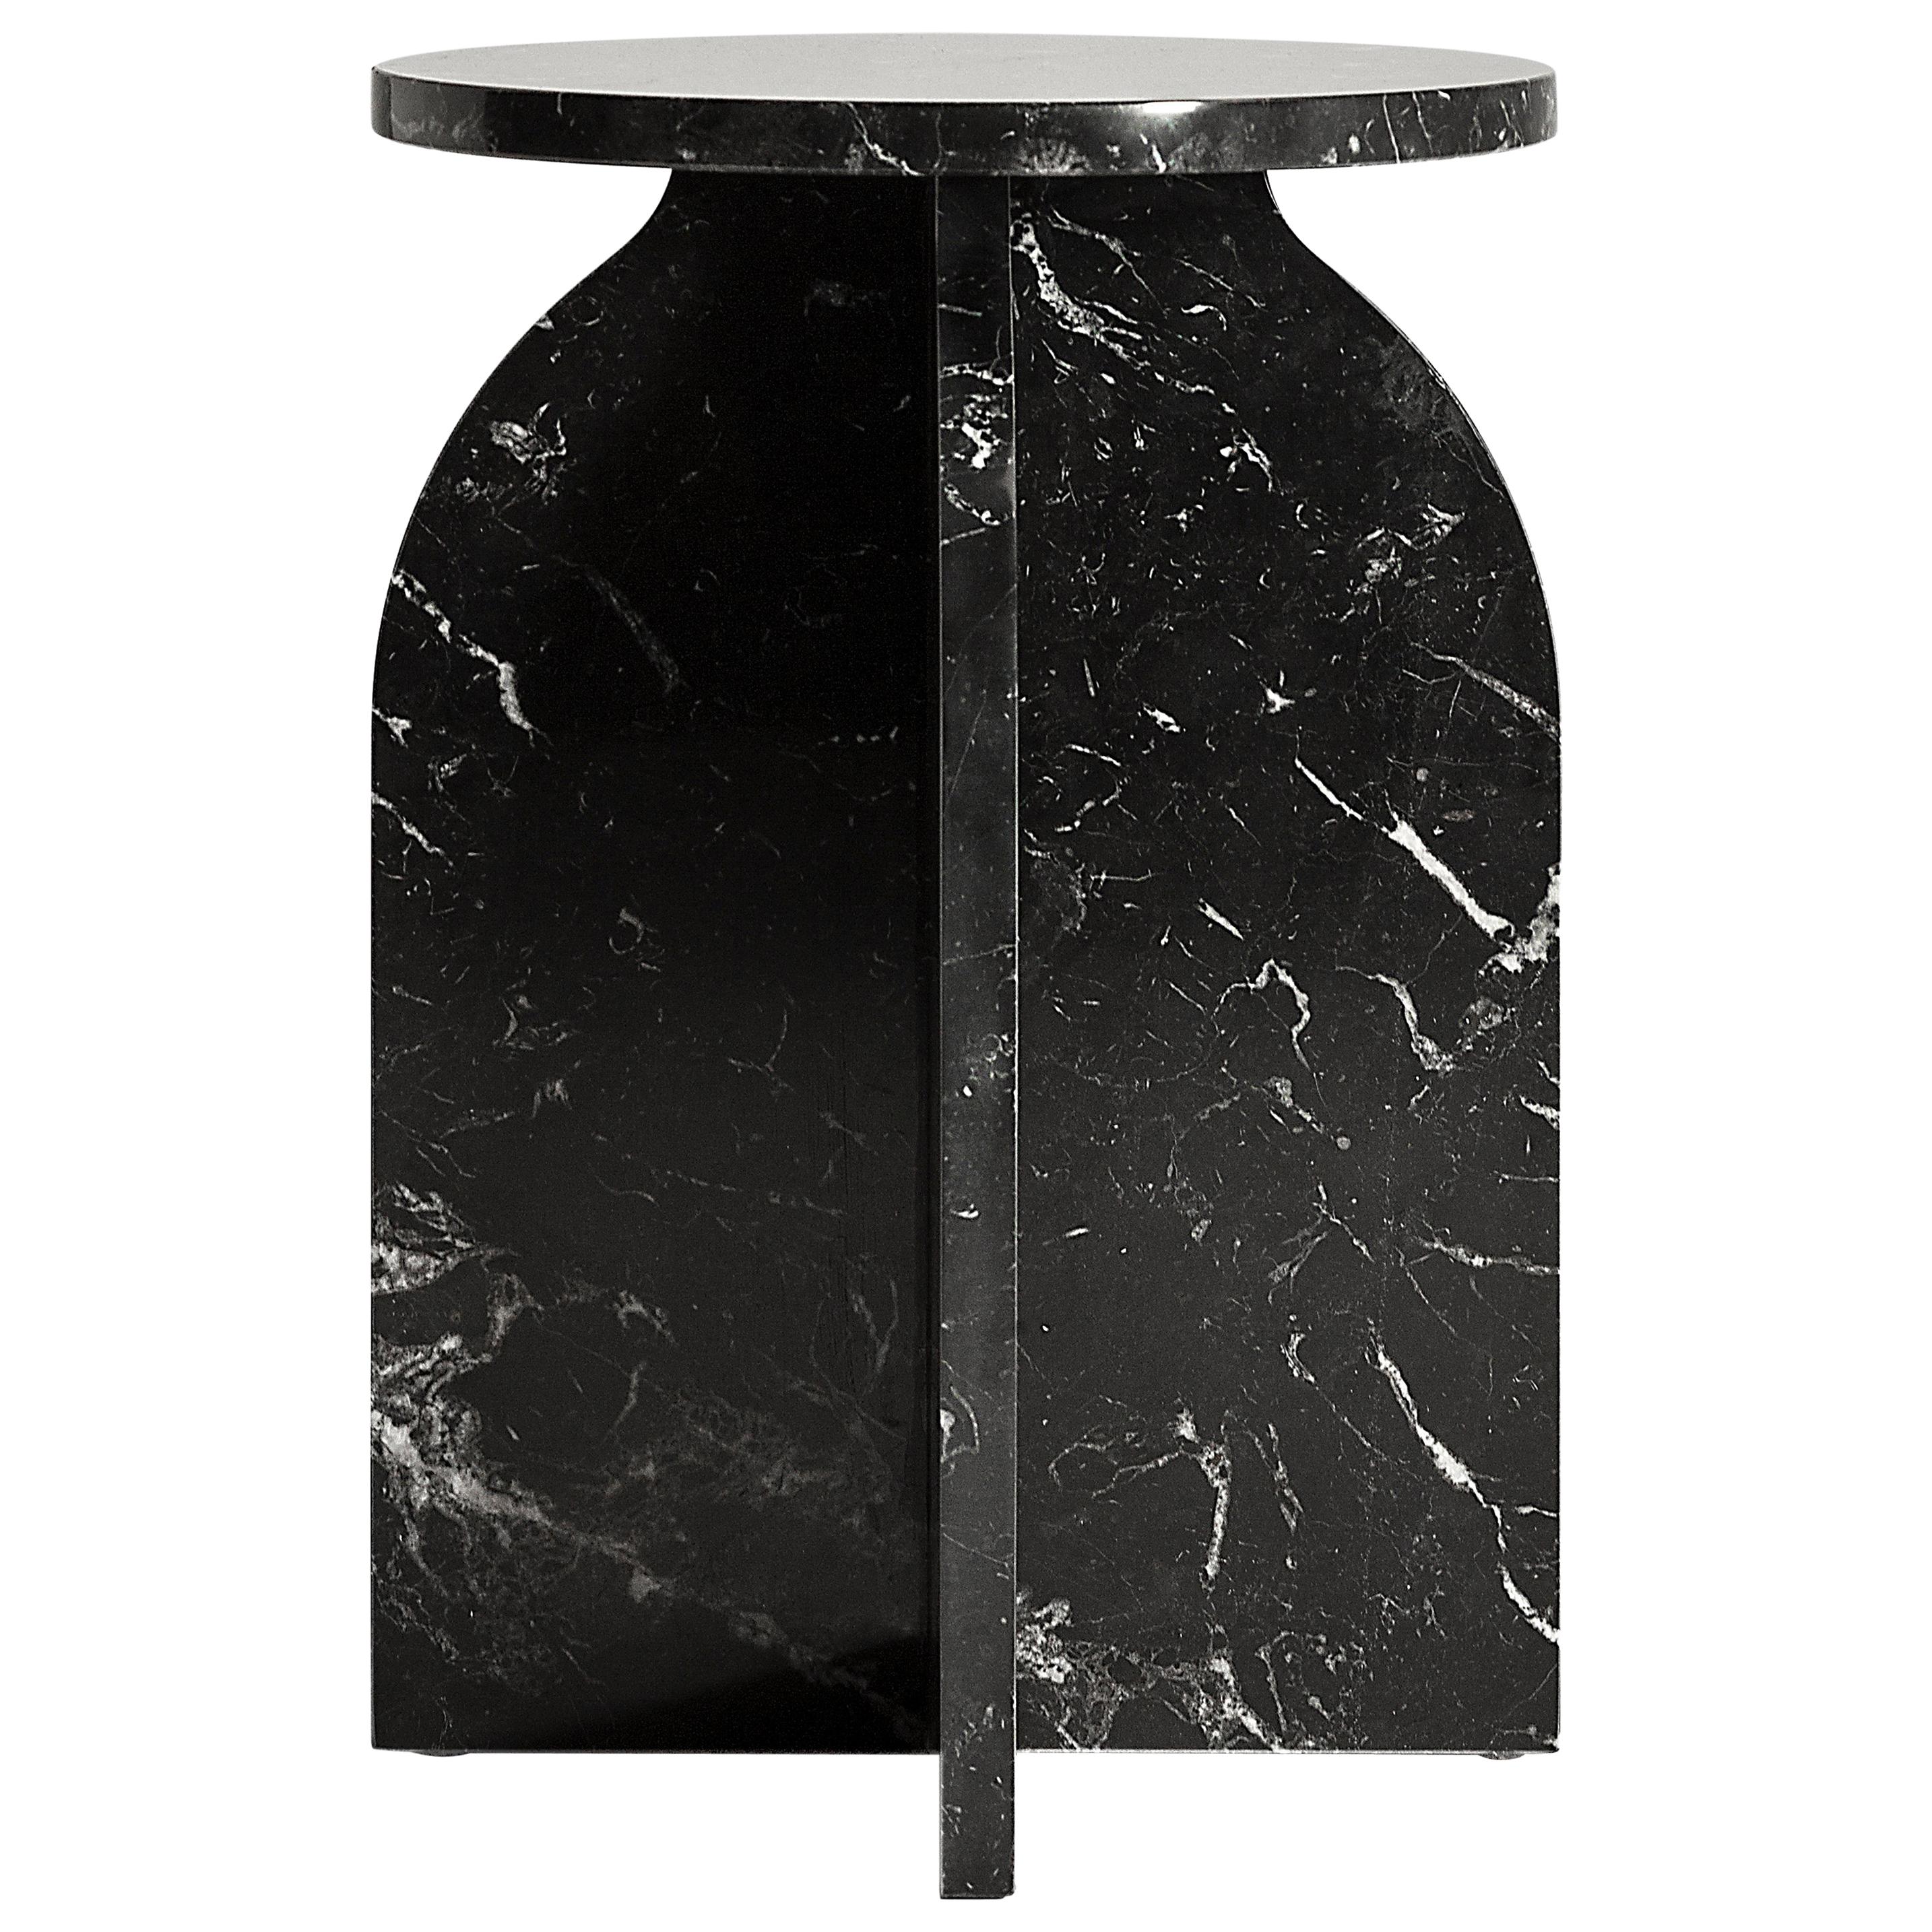 “Plus Side Table” Black Marquina Marble Minimalist Side Table by Aparentment